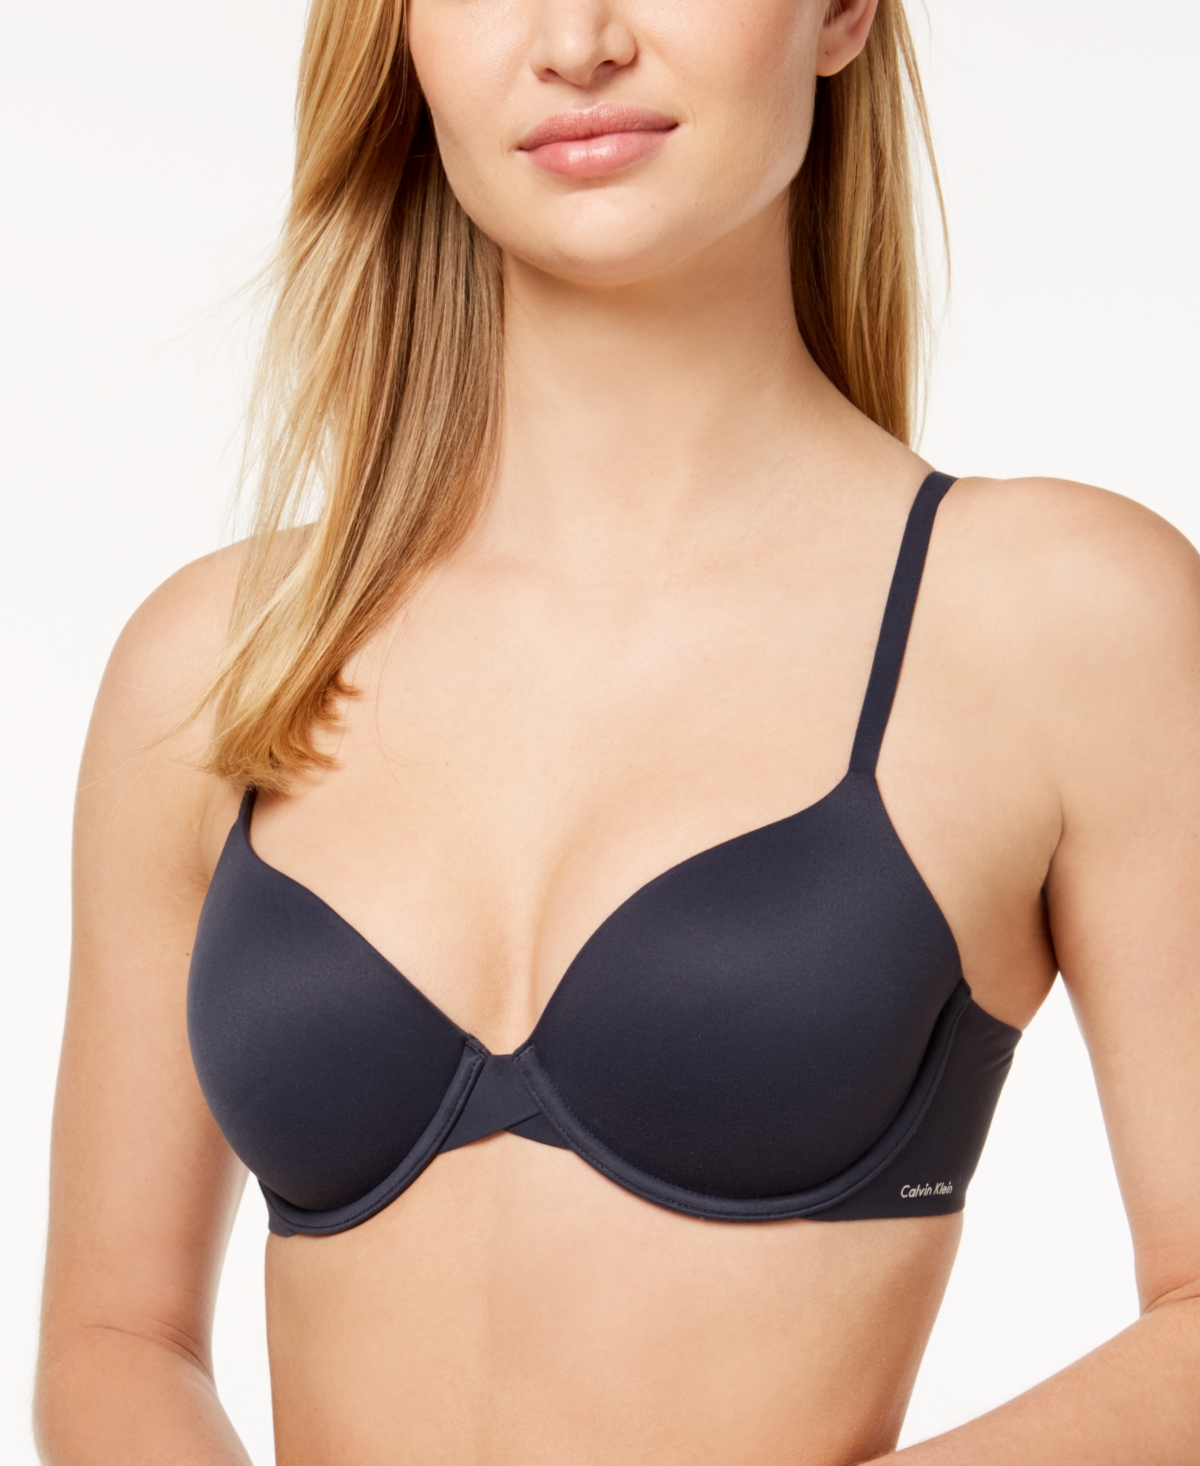 UPC 011531137547 product image for Calvin Klein Perfectly Fit Full Coverage T-Shirt Bra F3837 | upcitemdb.com